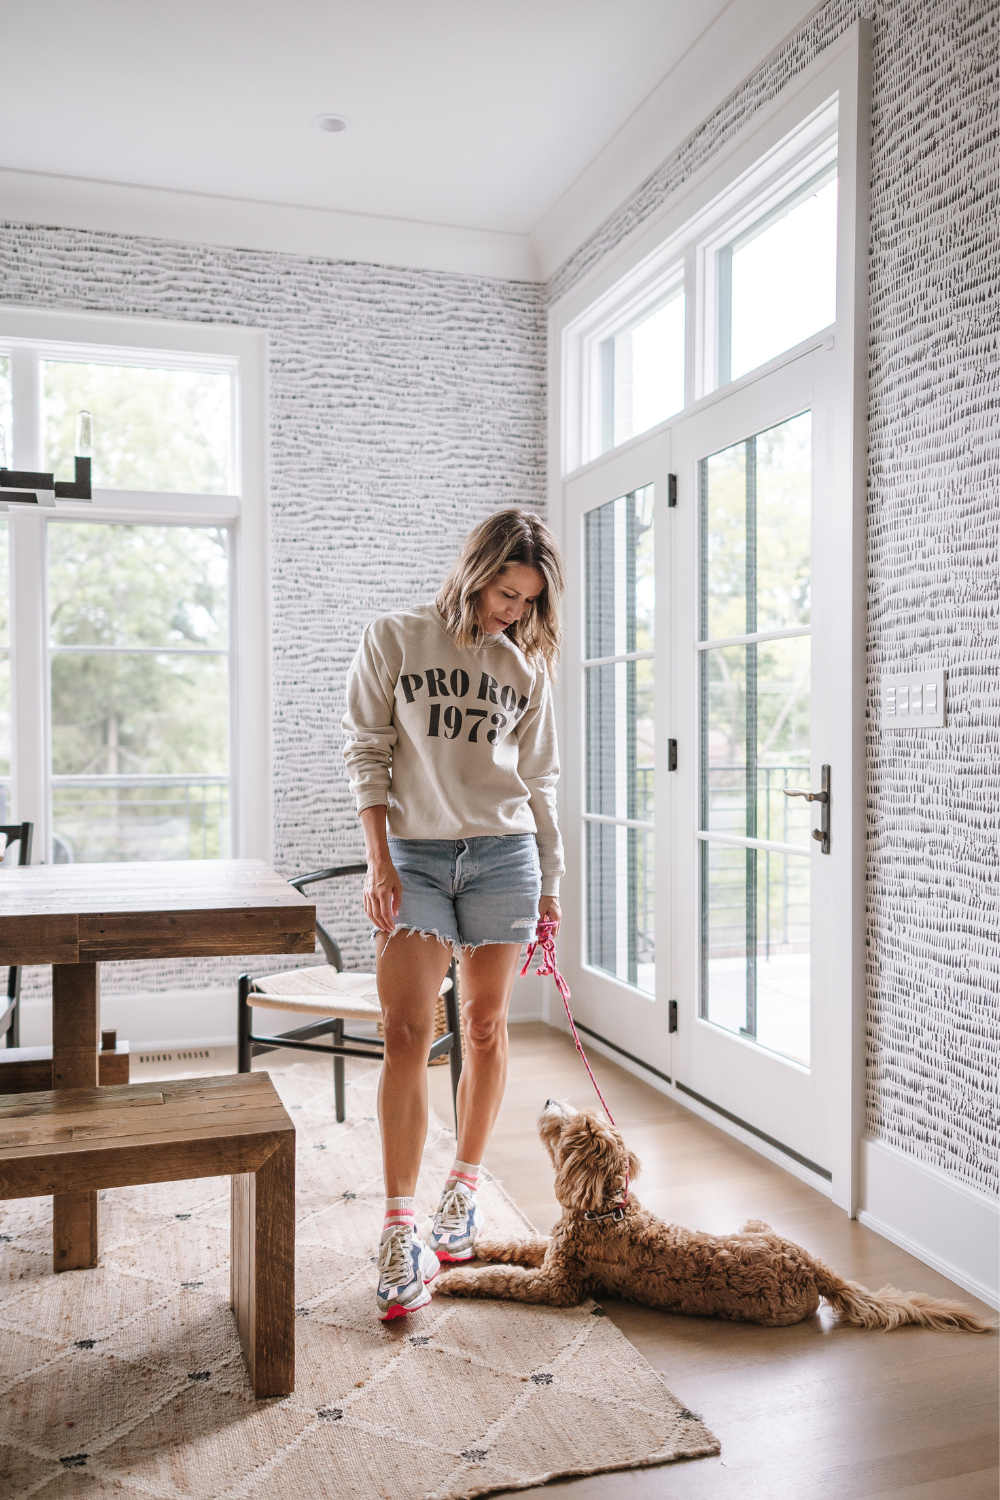 Suzanne wearing a "Pro Roe" sweatshirt in the kitchen nook with her dog, Georgia 